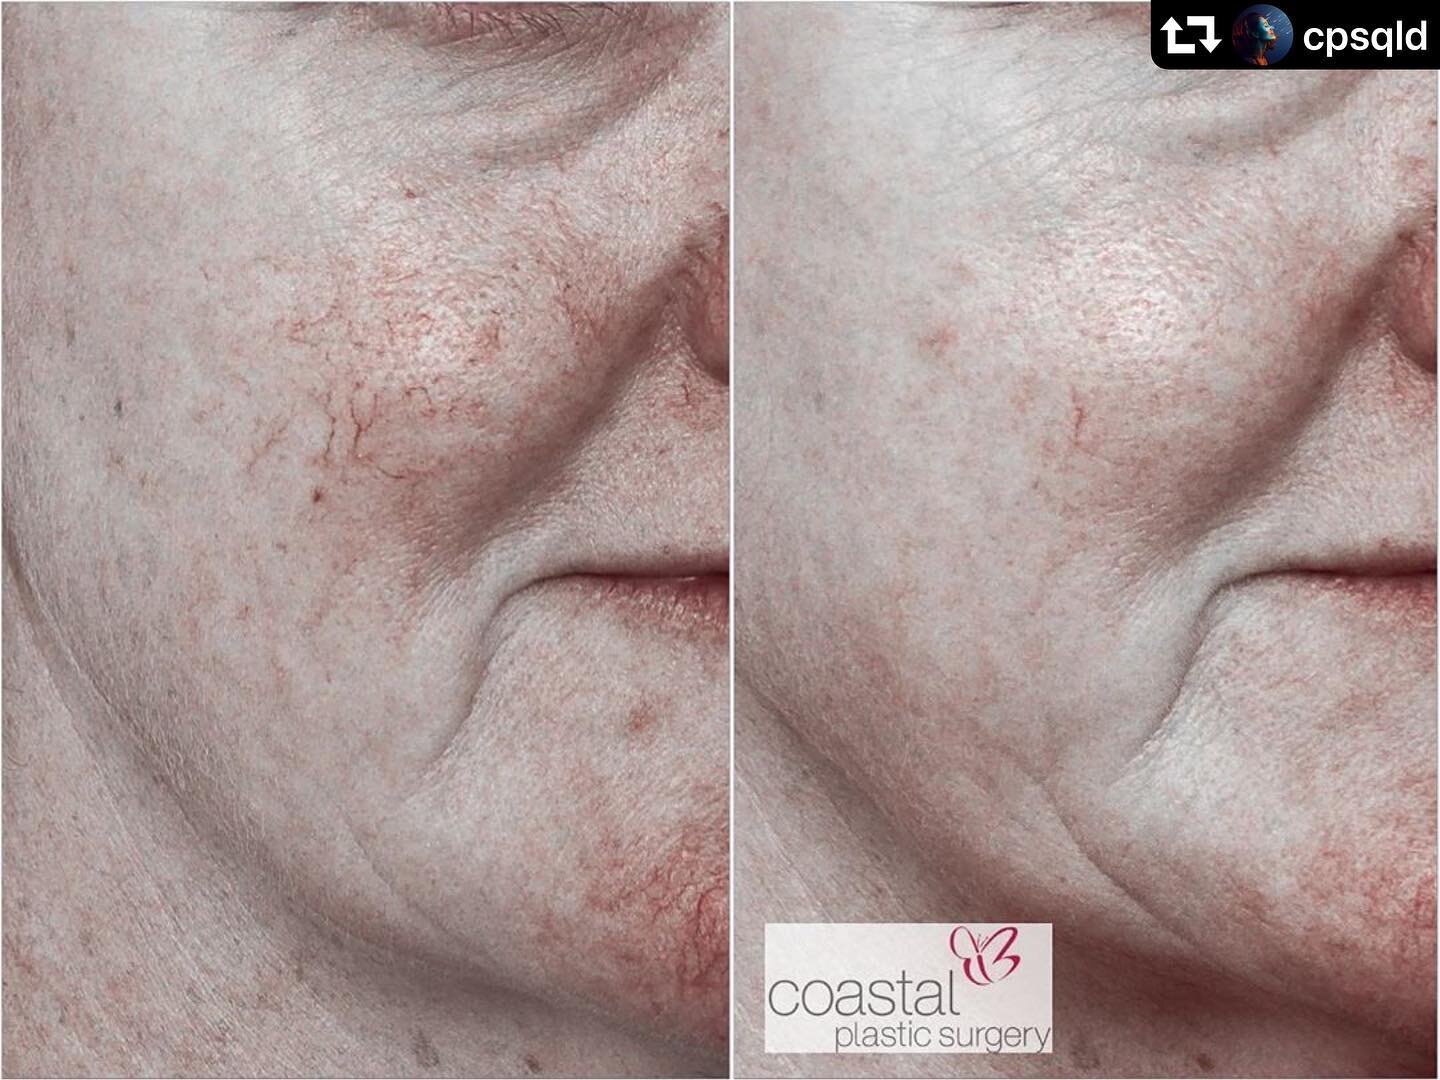 #repost @cpsqld
・・・
Does Vascular Laser work? 💯 %

⚡️This client was concerned about the vascular (redness) and pigment (brown) components of her skin
⚡️ Our Cutera Excel V loves skin conditions which are brown and red 
⚡️This is taken after 2 treat